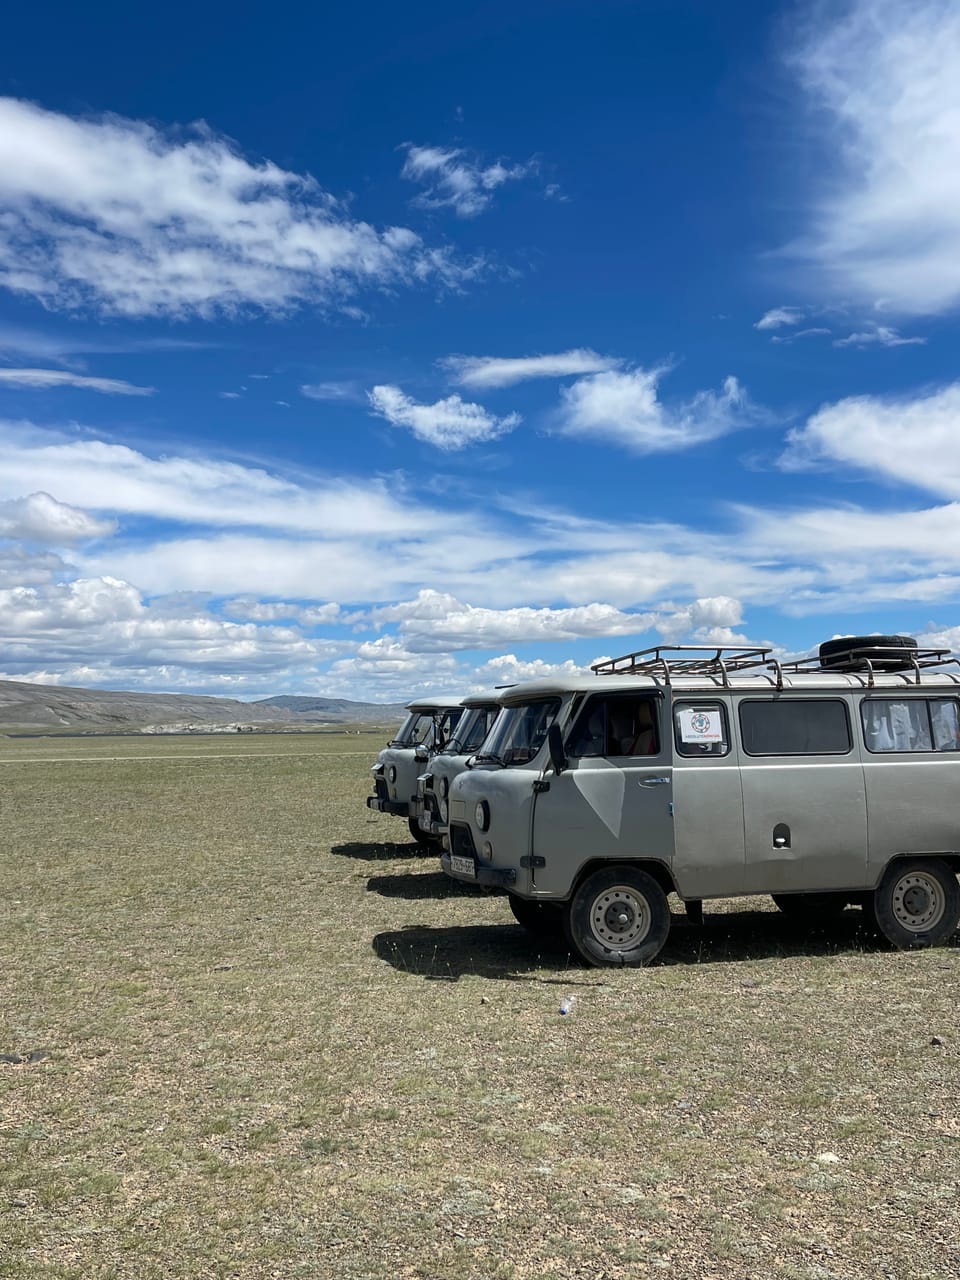 The Naadam Diaries: The Unofficial Horse Of Mongolia